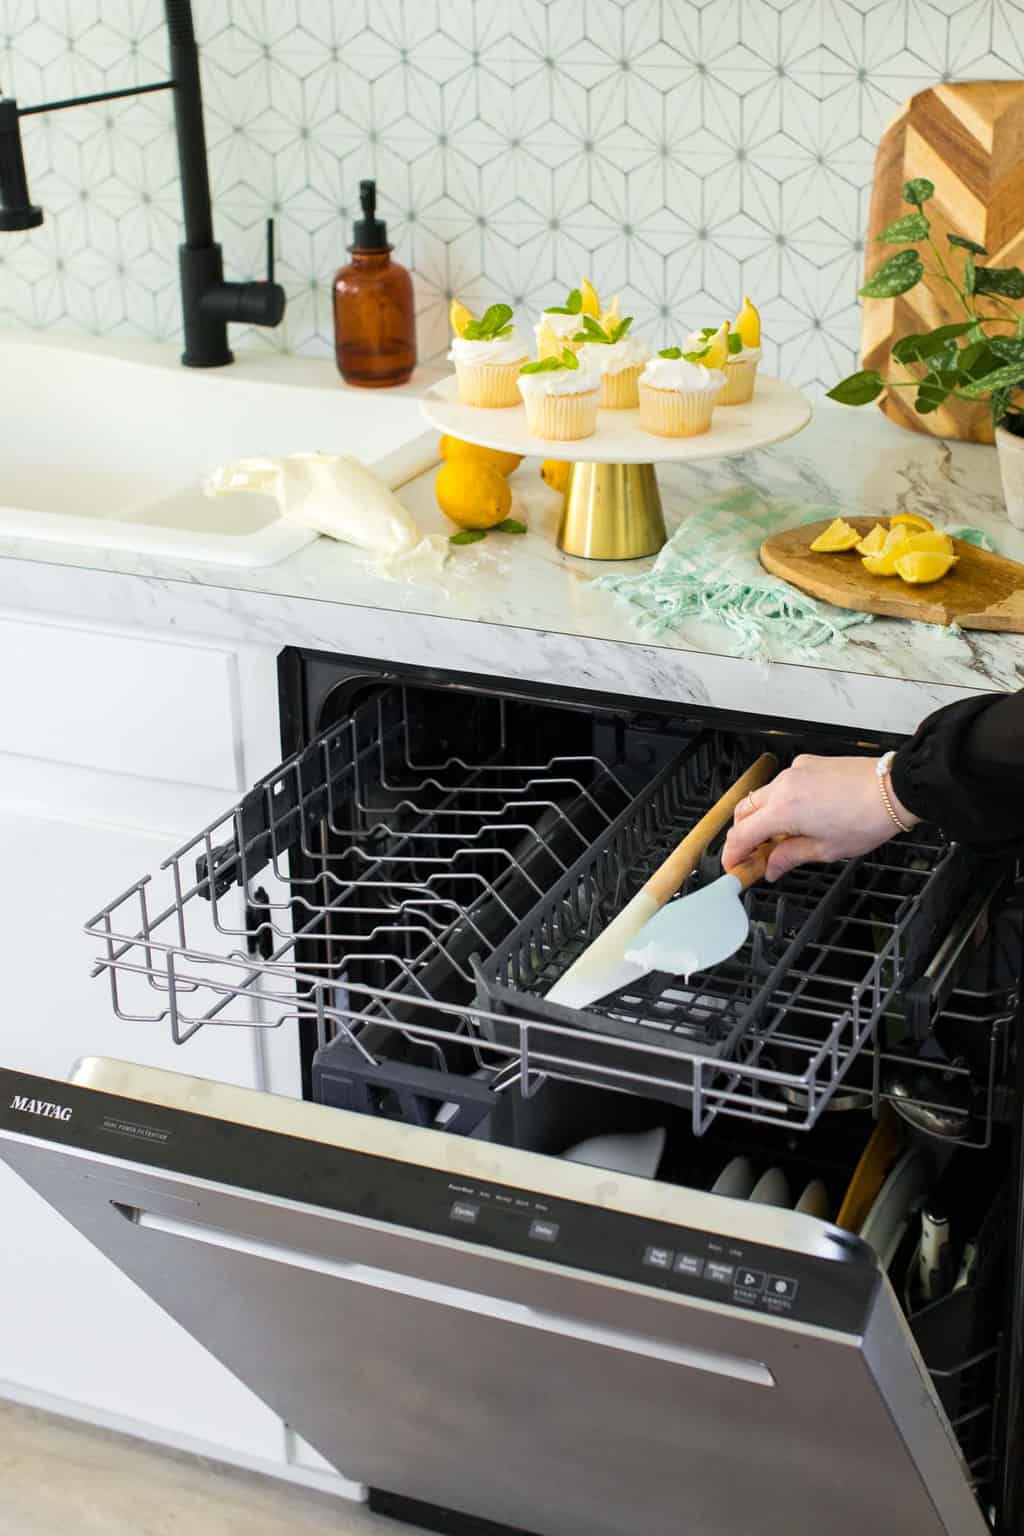 photo of our top drawer of our Maytag dishwasher by top Houston lifestyle blogger Ashley Rose of Sugar & Cloth